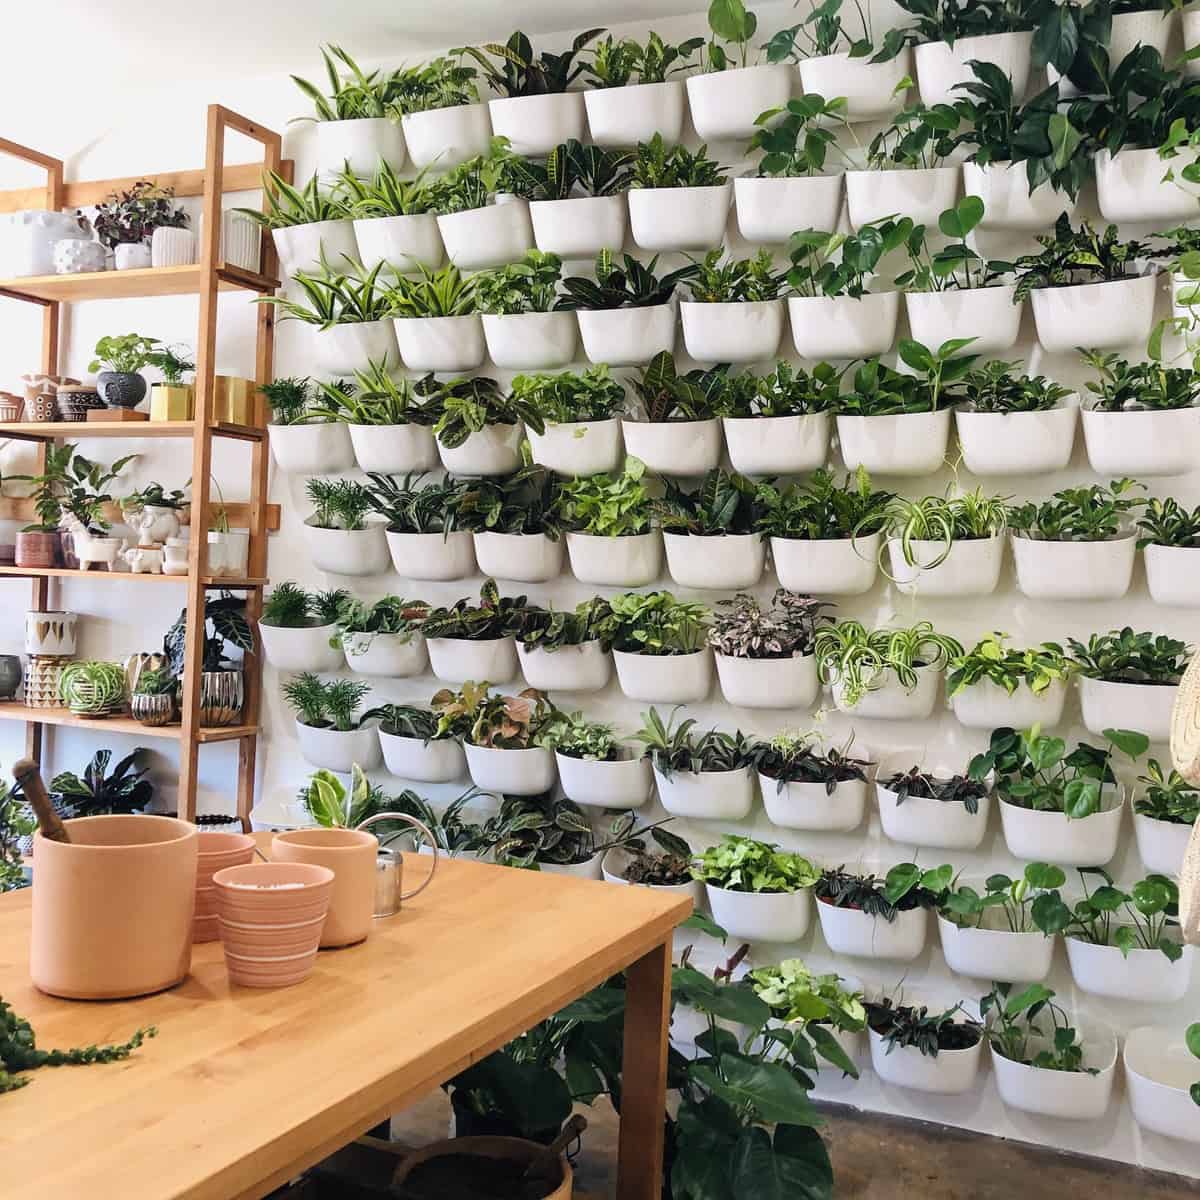 Image of the interior of greenwood shop in los angeles CA